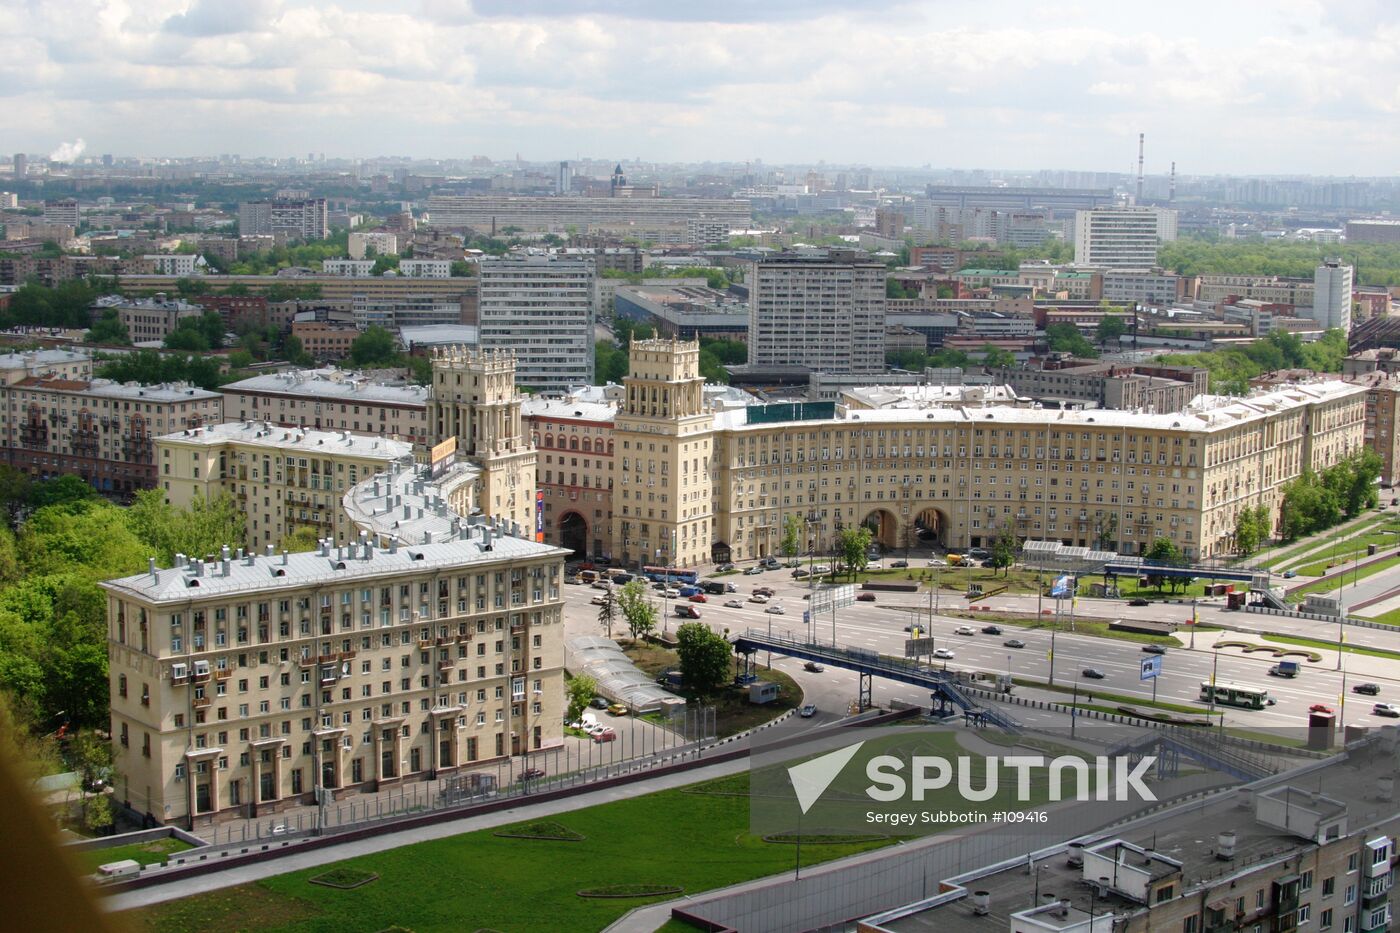 MOSCOW BIRD'S EYE VIEW GAGARIN SQUARE